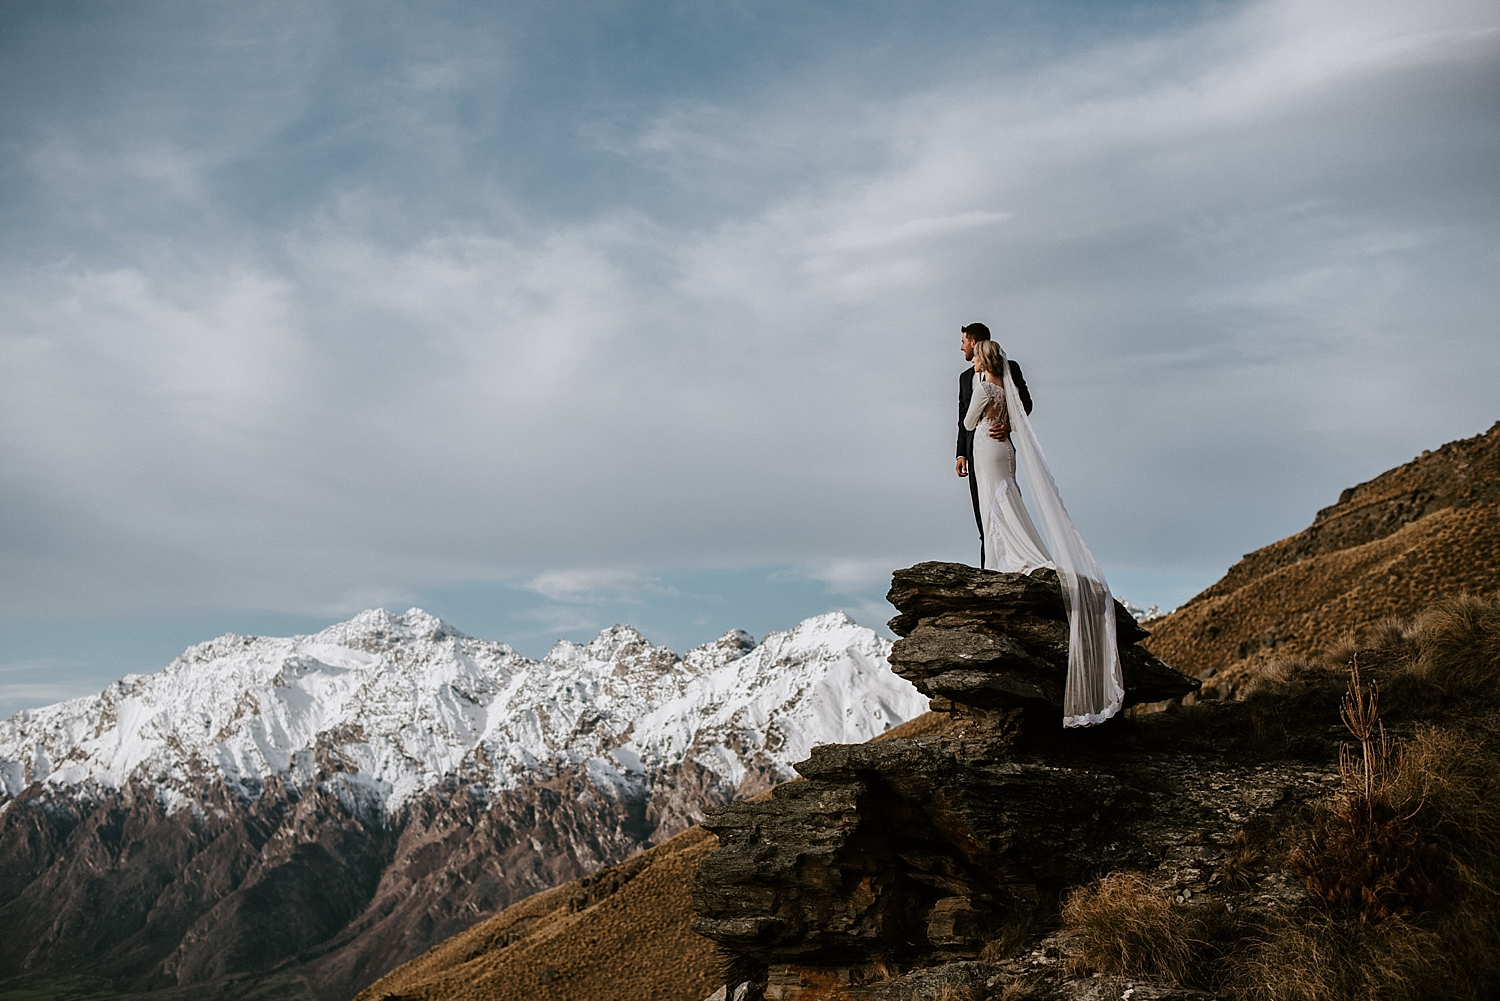 Newly wed couple embrace on a cliff in front of snow capped hills in Queenstown.